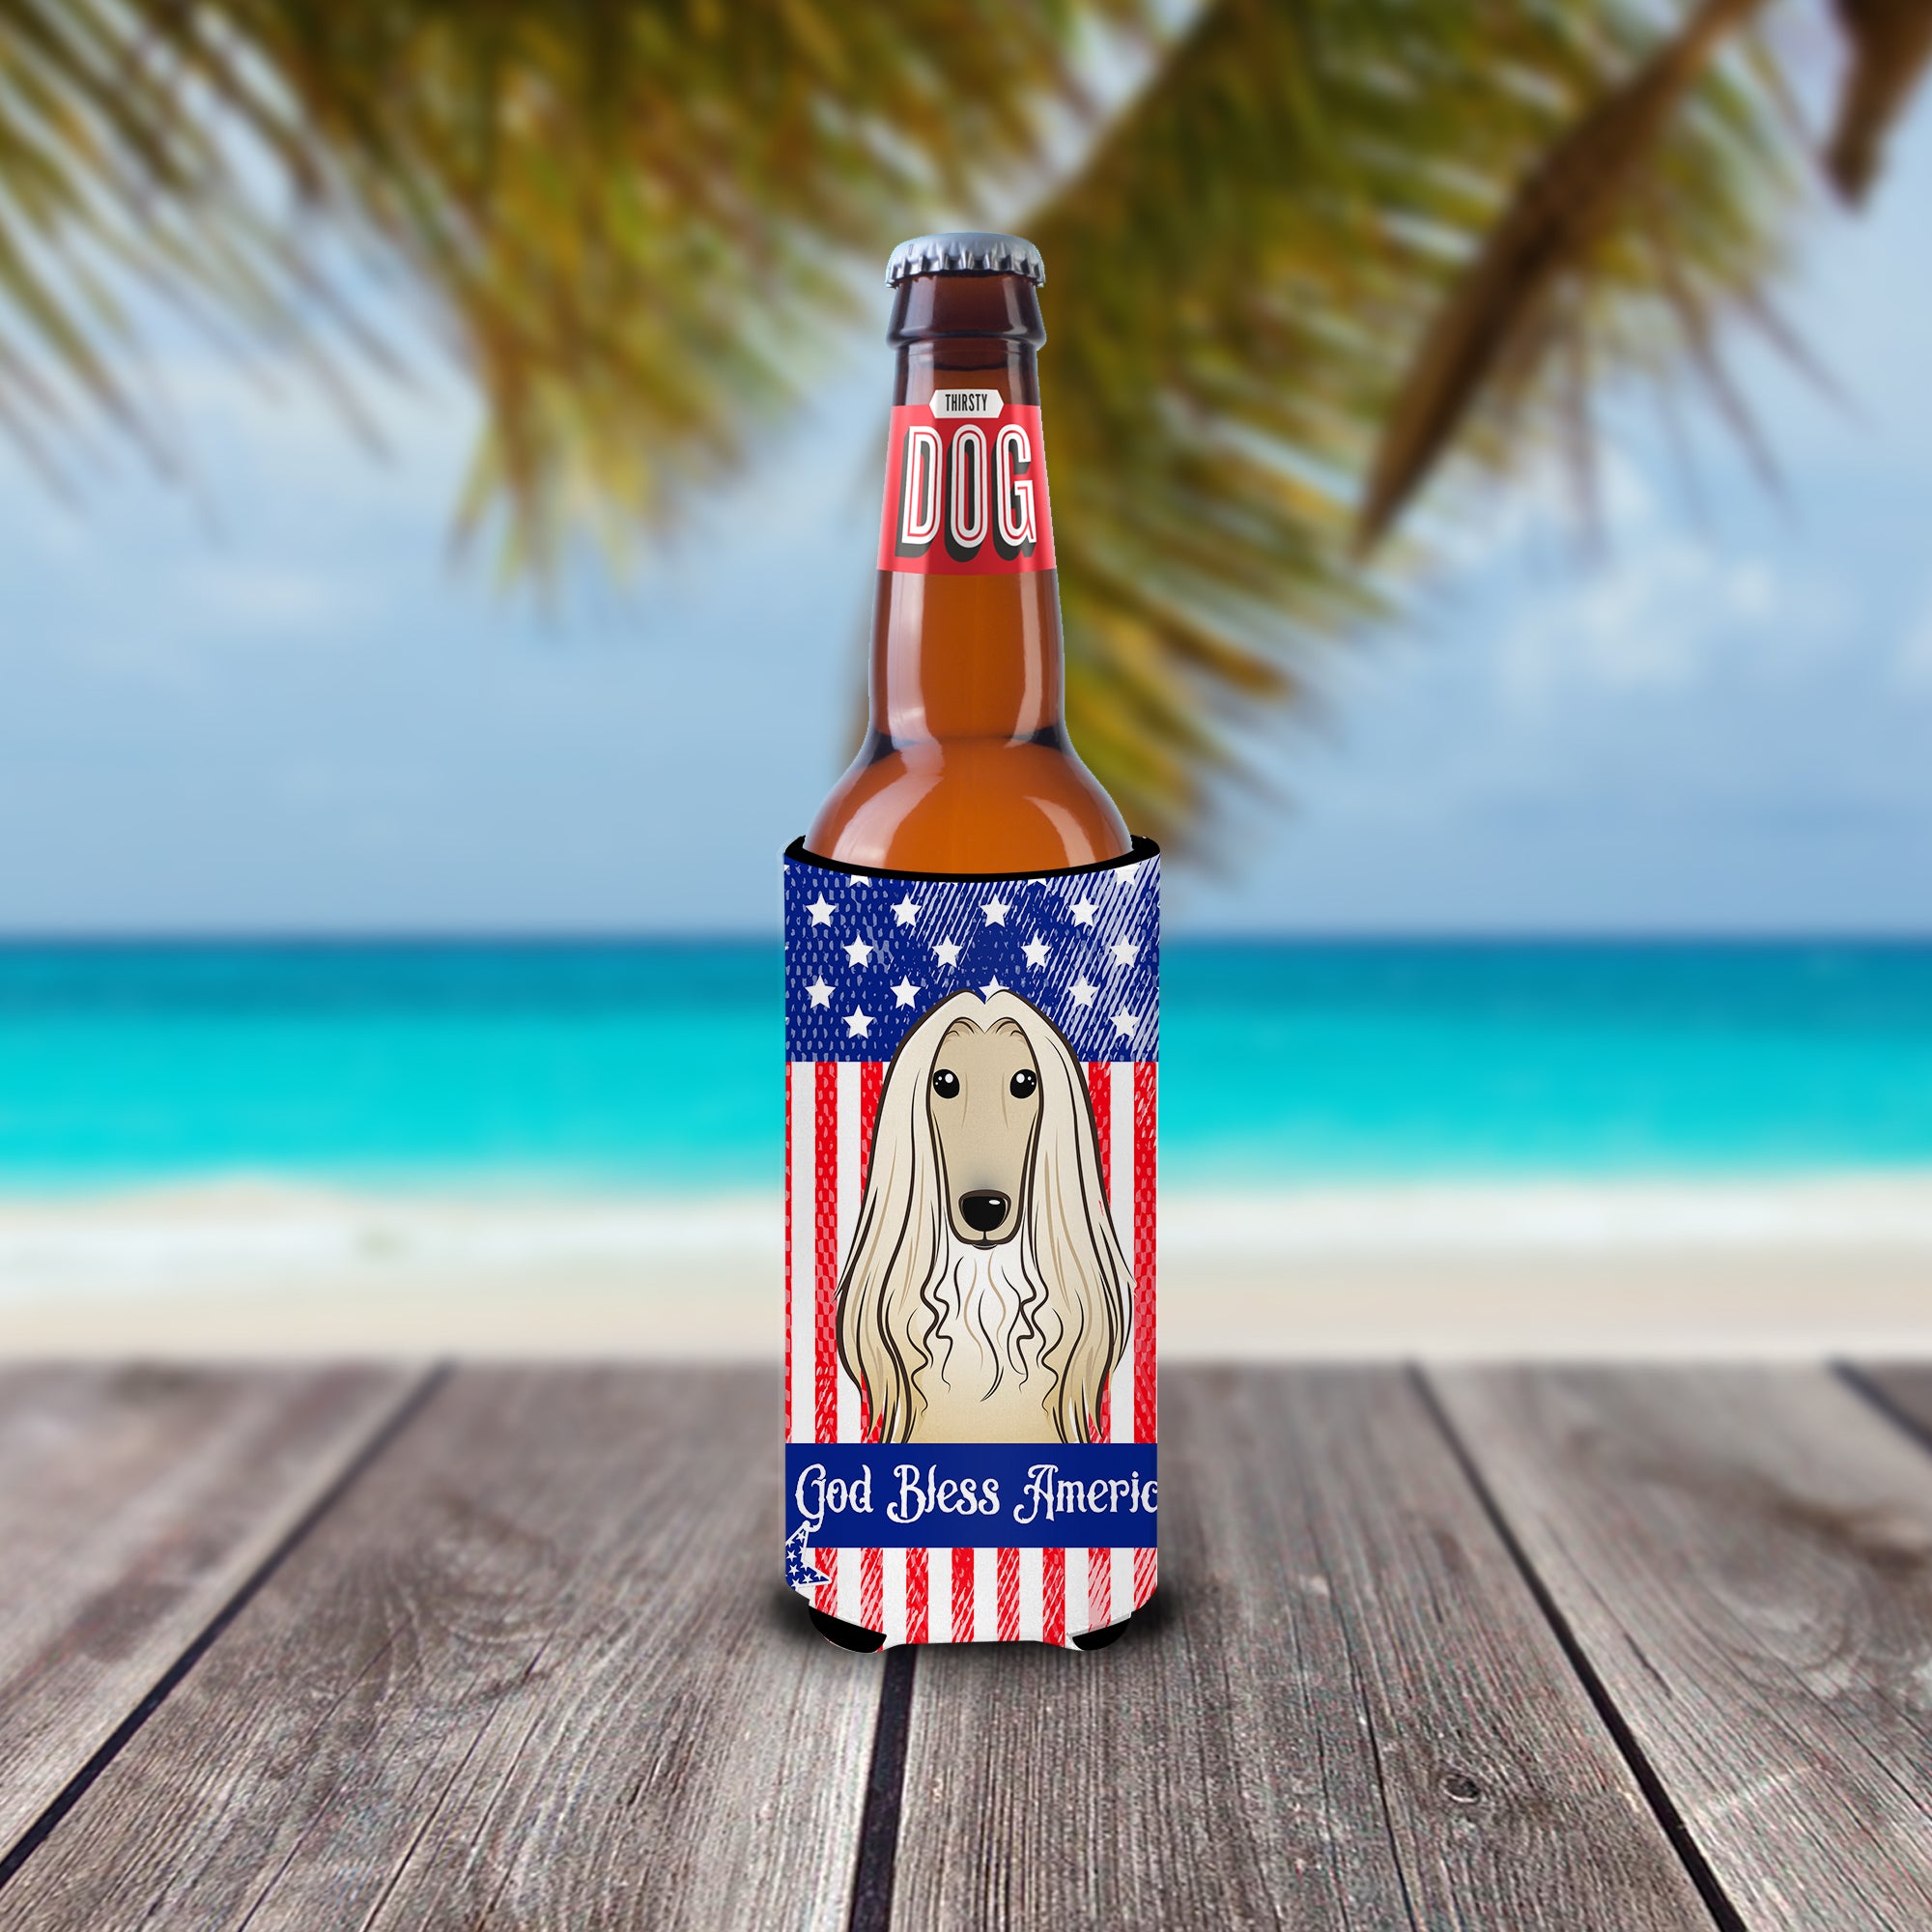 God Bless American Flag with Afghan Hound  Ultra Beverage Insulator for slim cans BB2174MUK